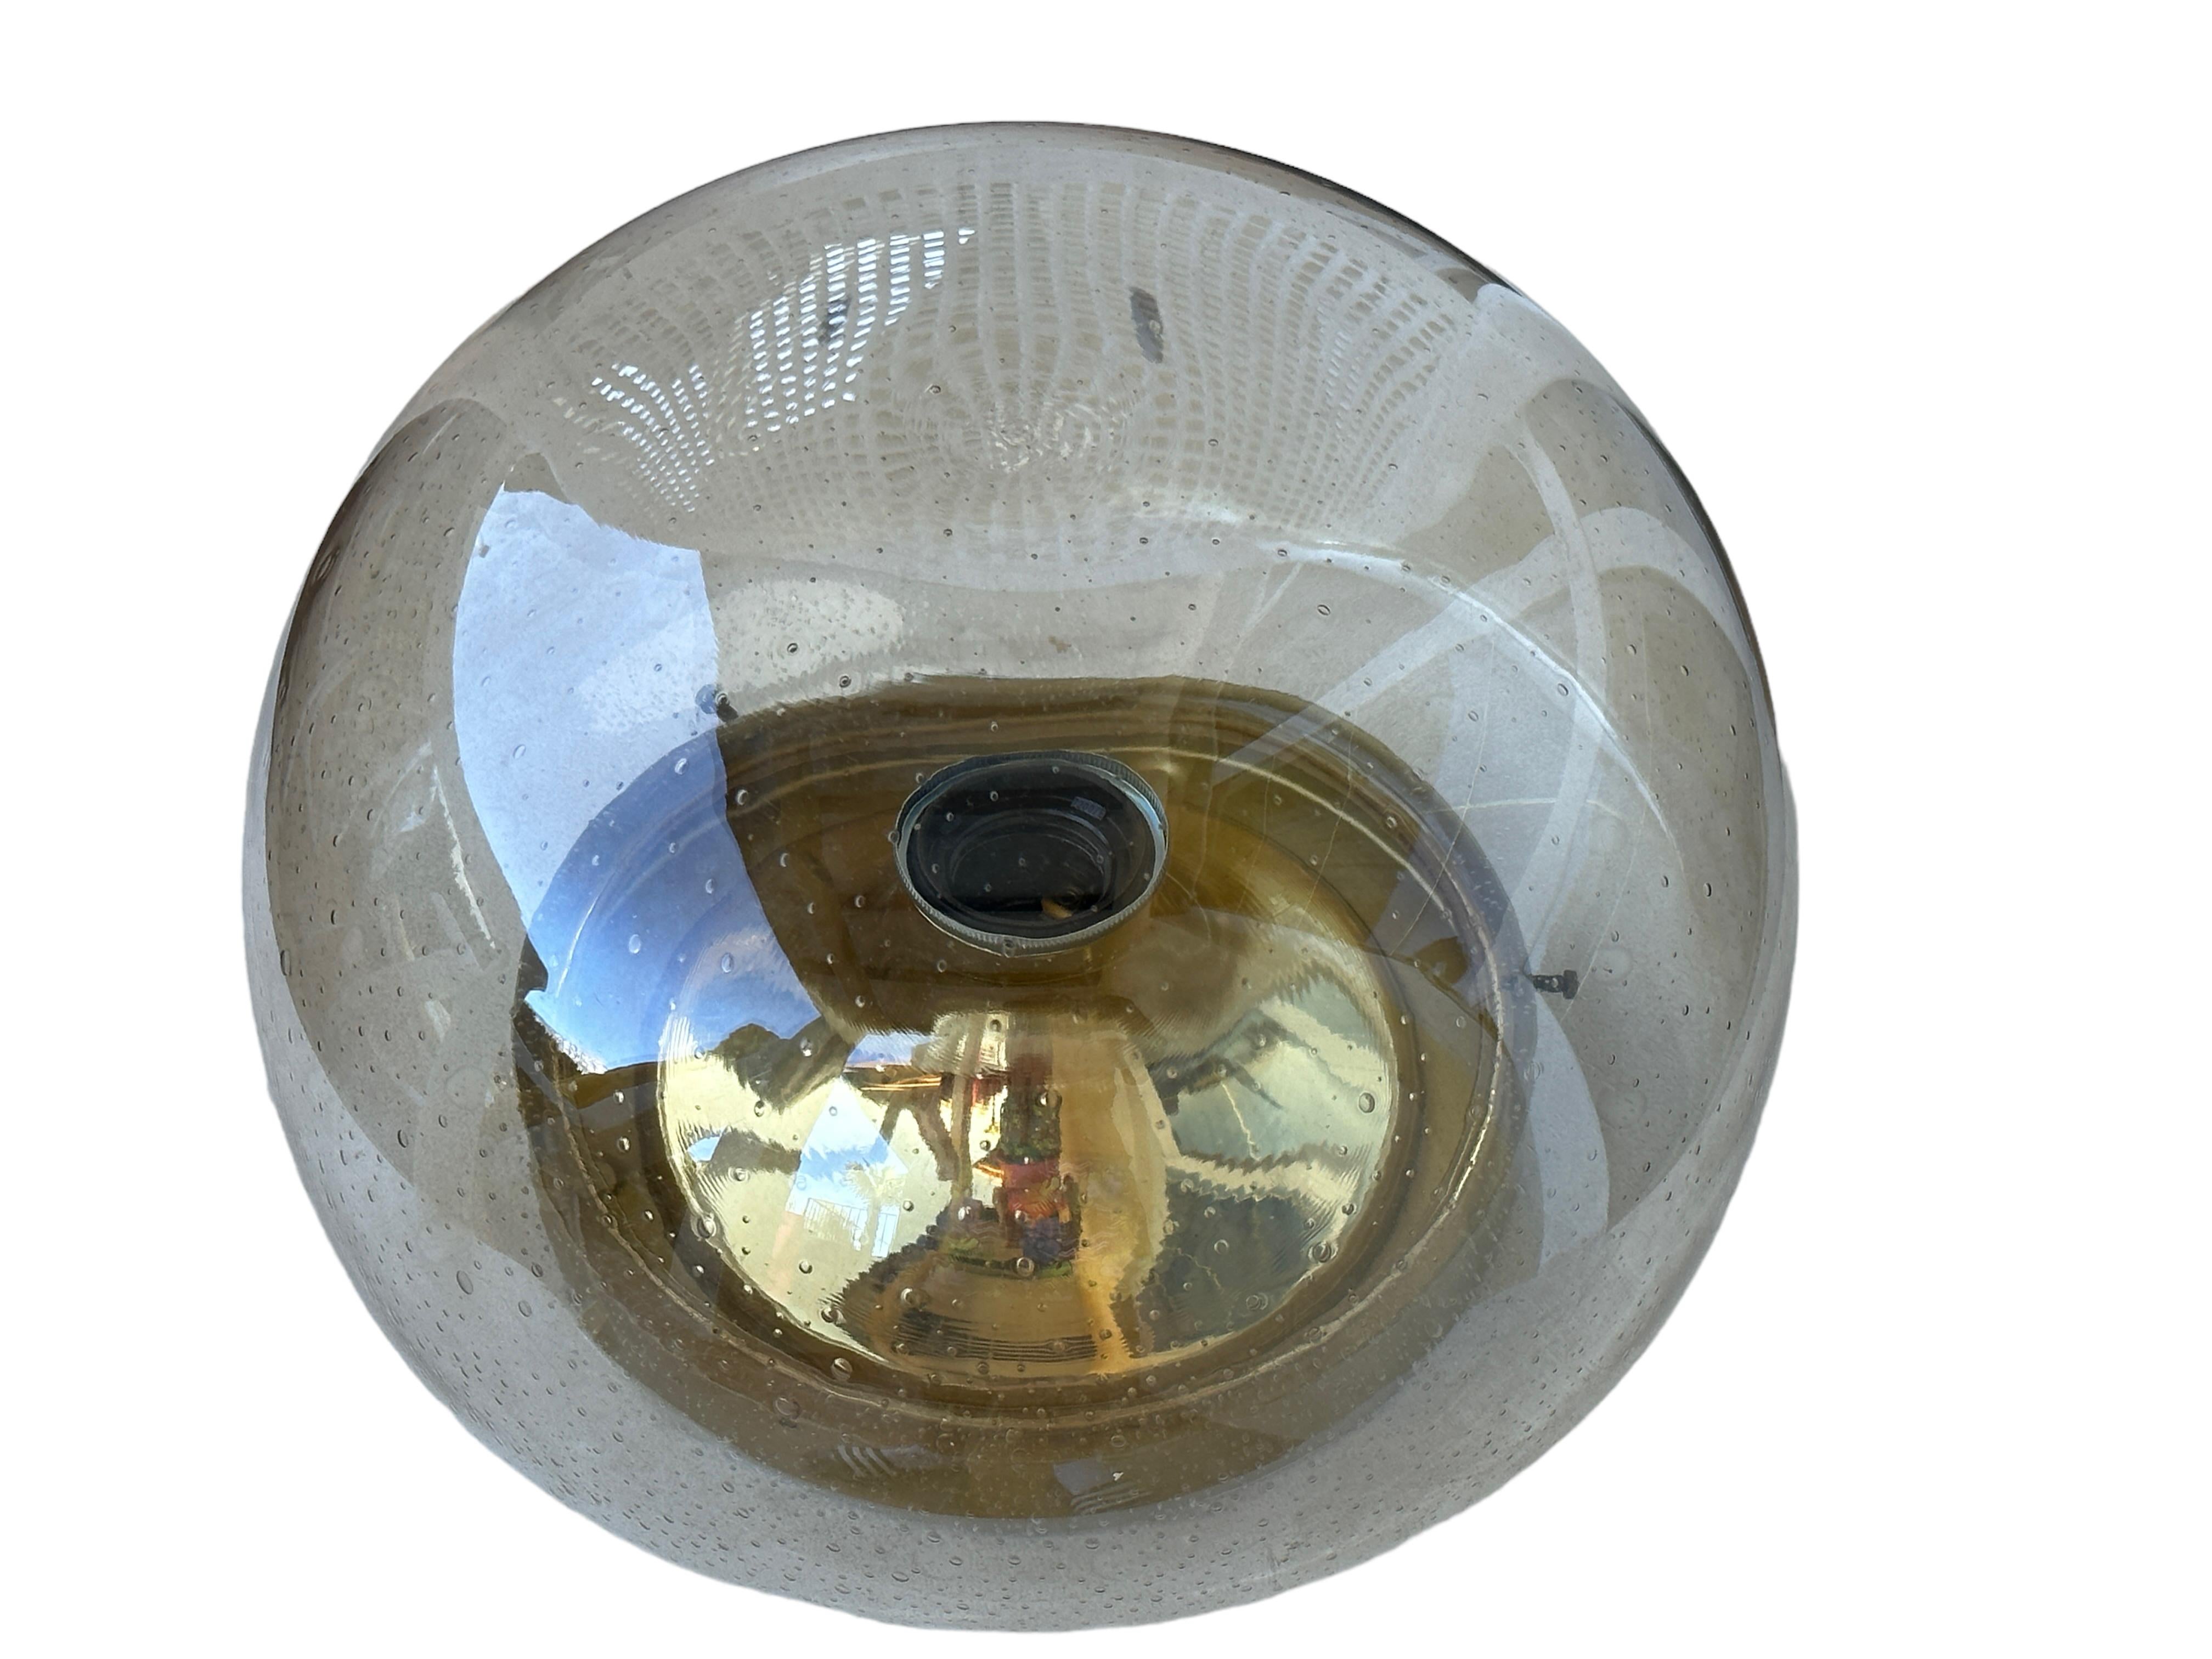 A beautiful flush mount by German manufacturer Glashuette Limburg. The bubble glass element is supported by a polished brass plate with a one light source. Beautiful bubble glass on a metal fixture. The Fixture requires one European E27 / 110 Volt